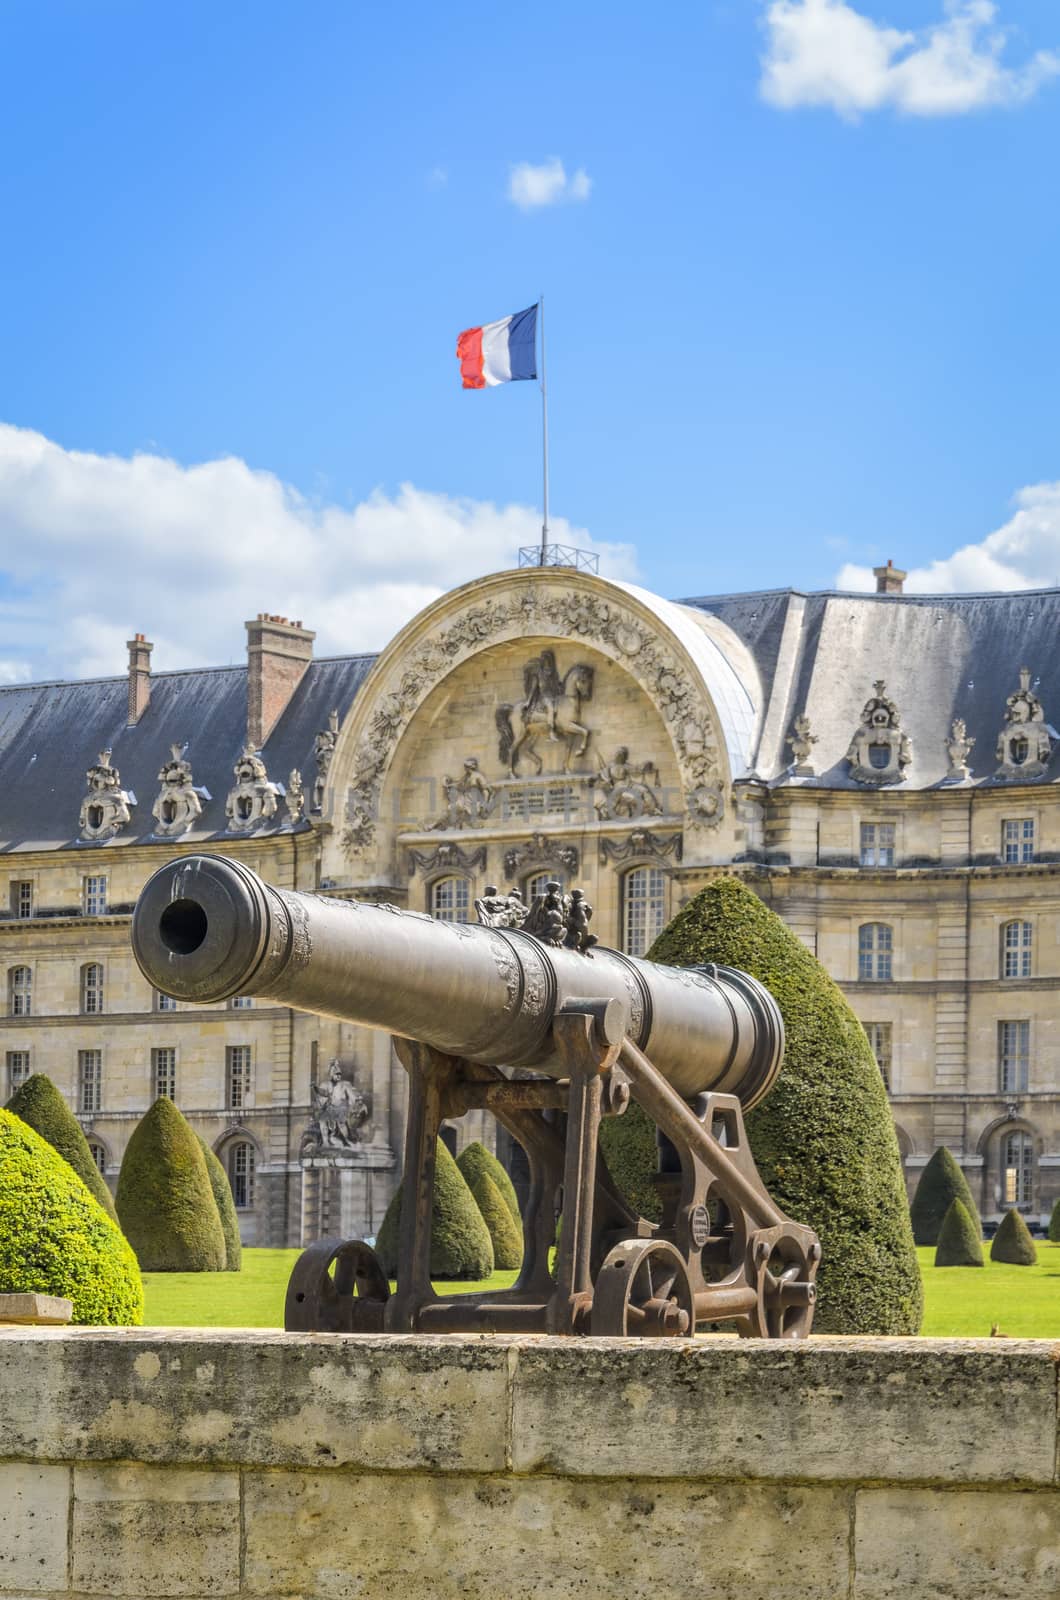 Cannons at Les Invalides by Valegorov